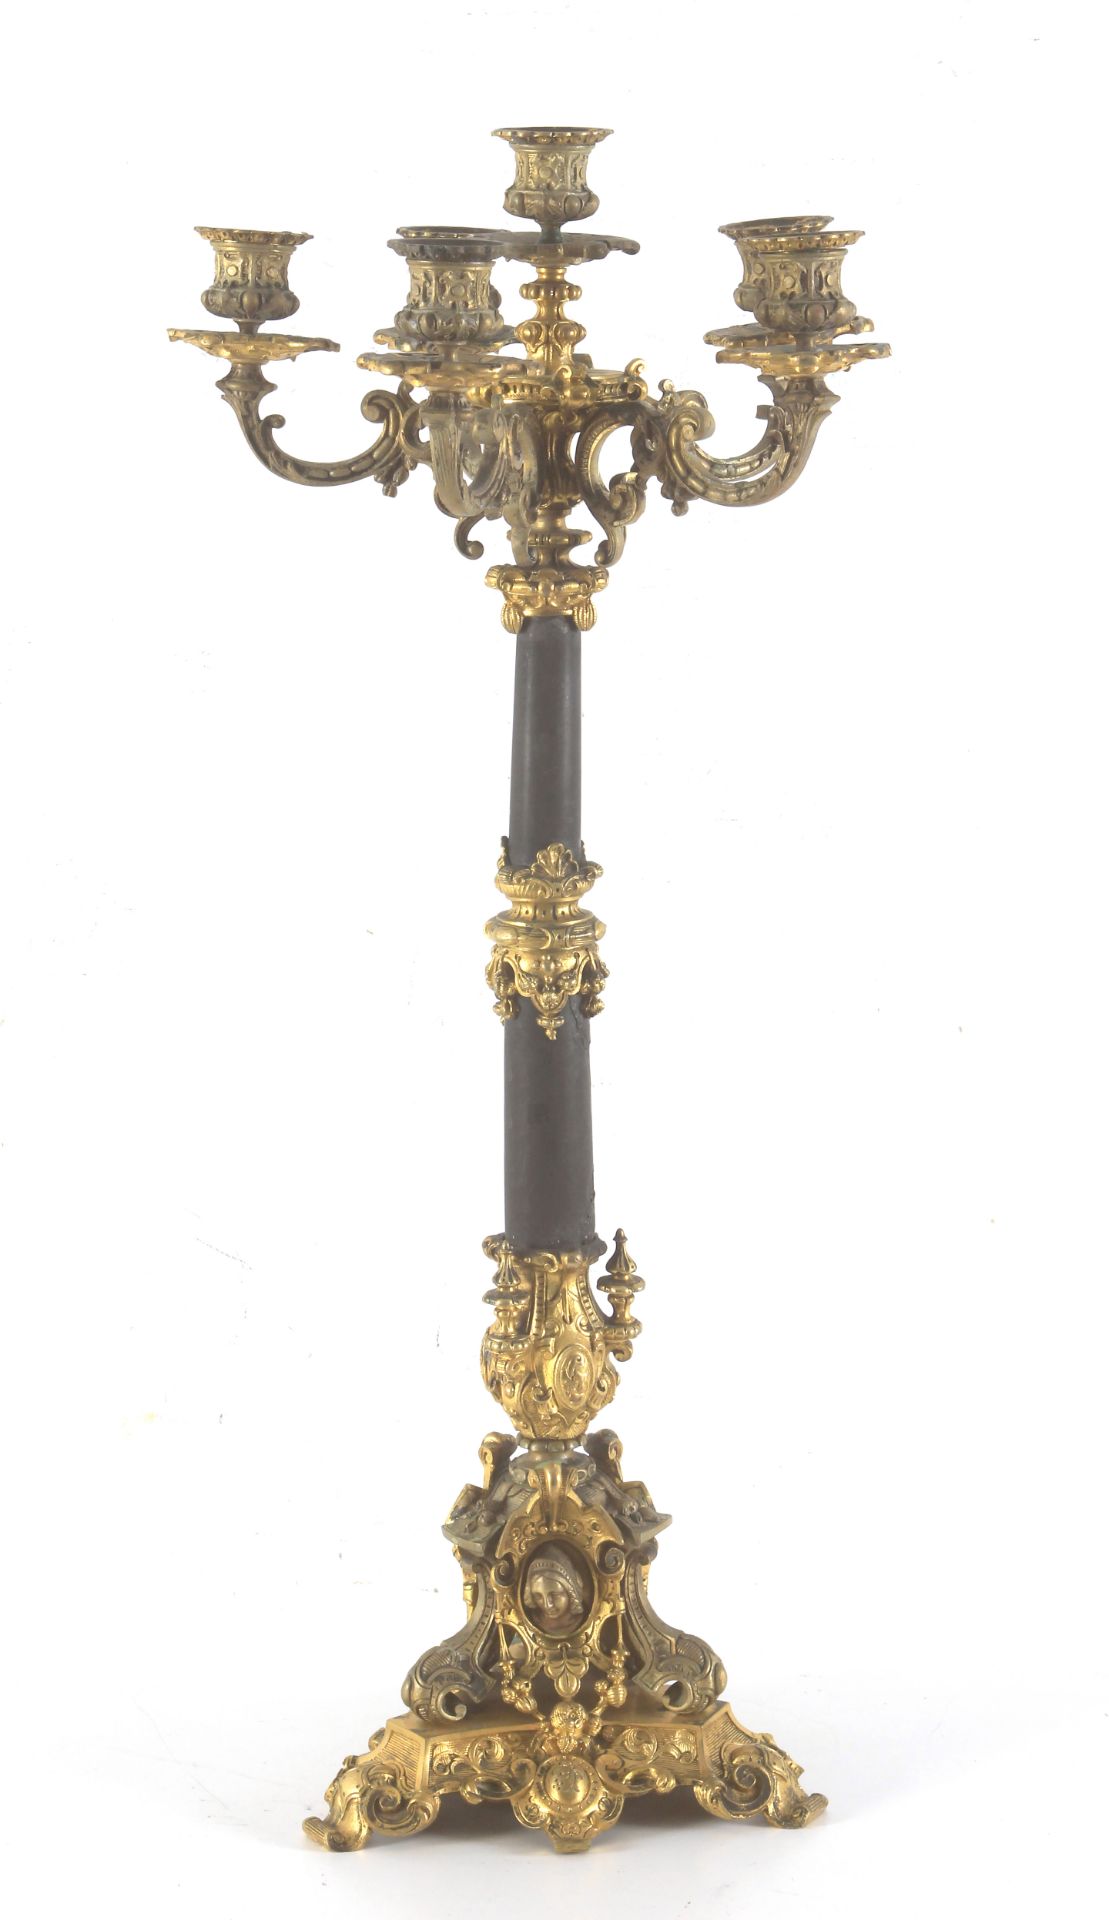 A 19th century Louis XV style French six light candelabrum - Image 5 of 8